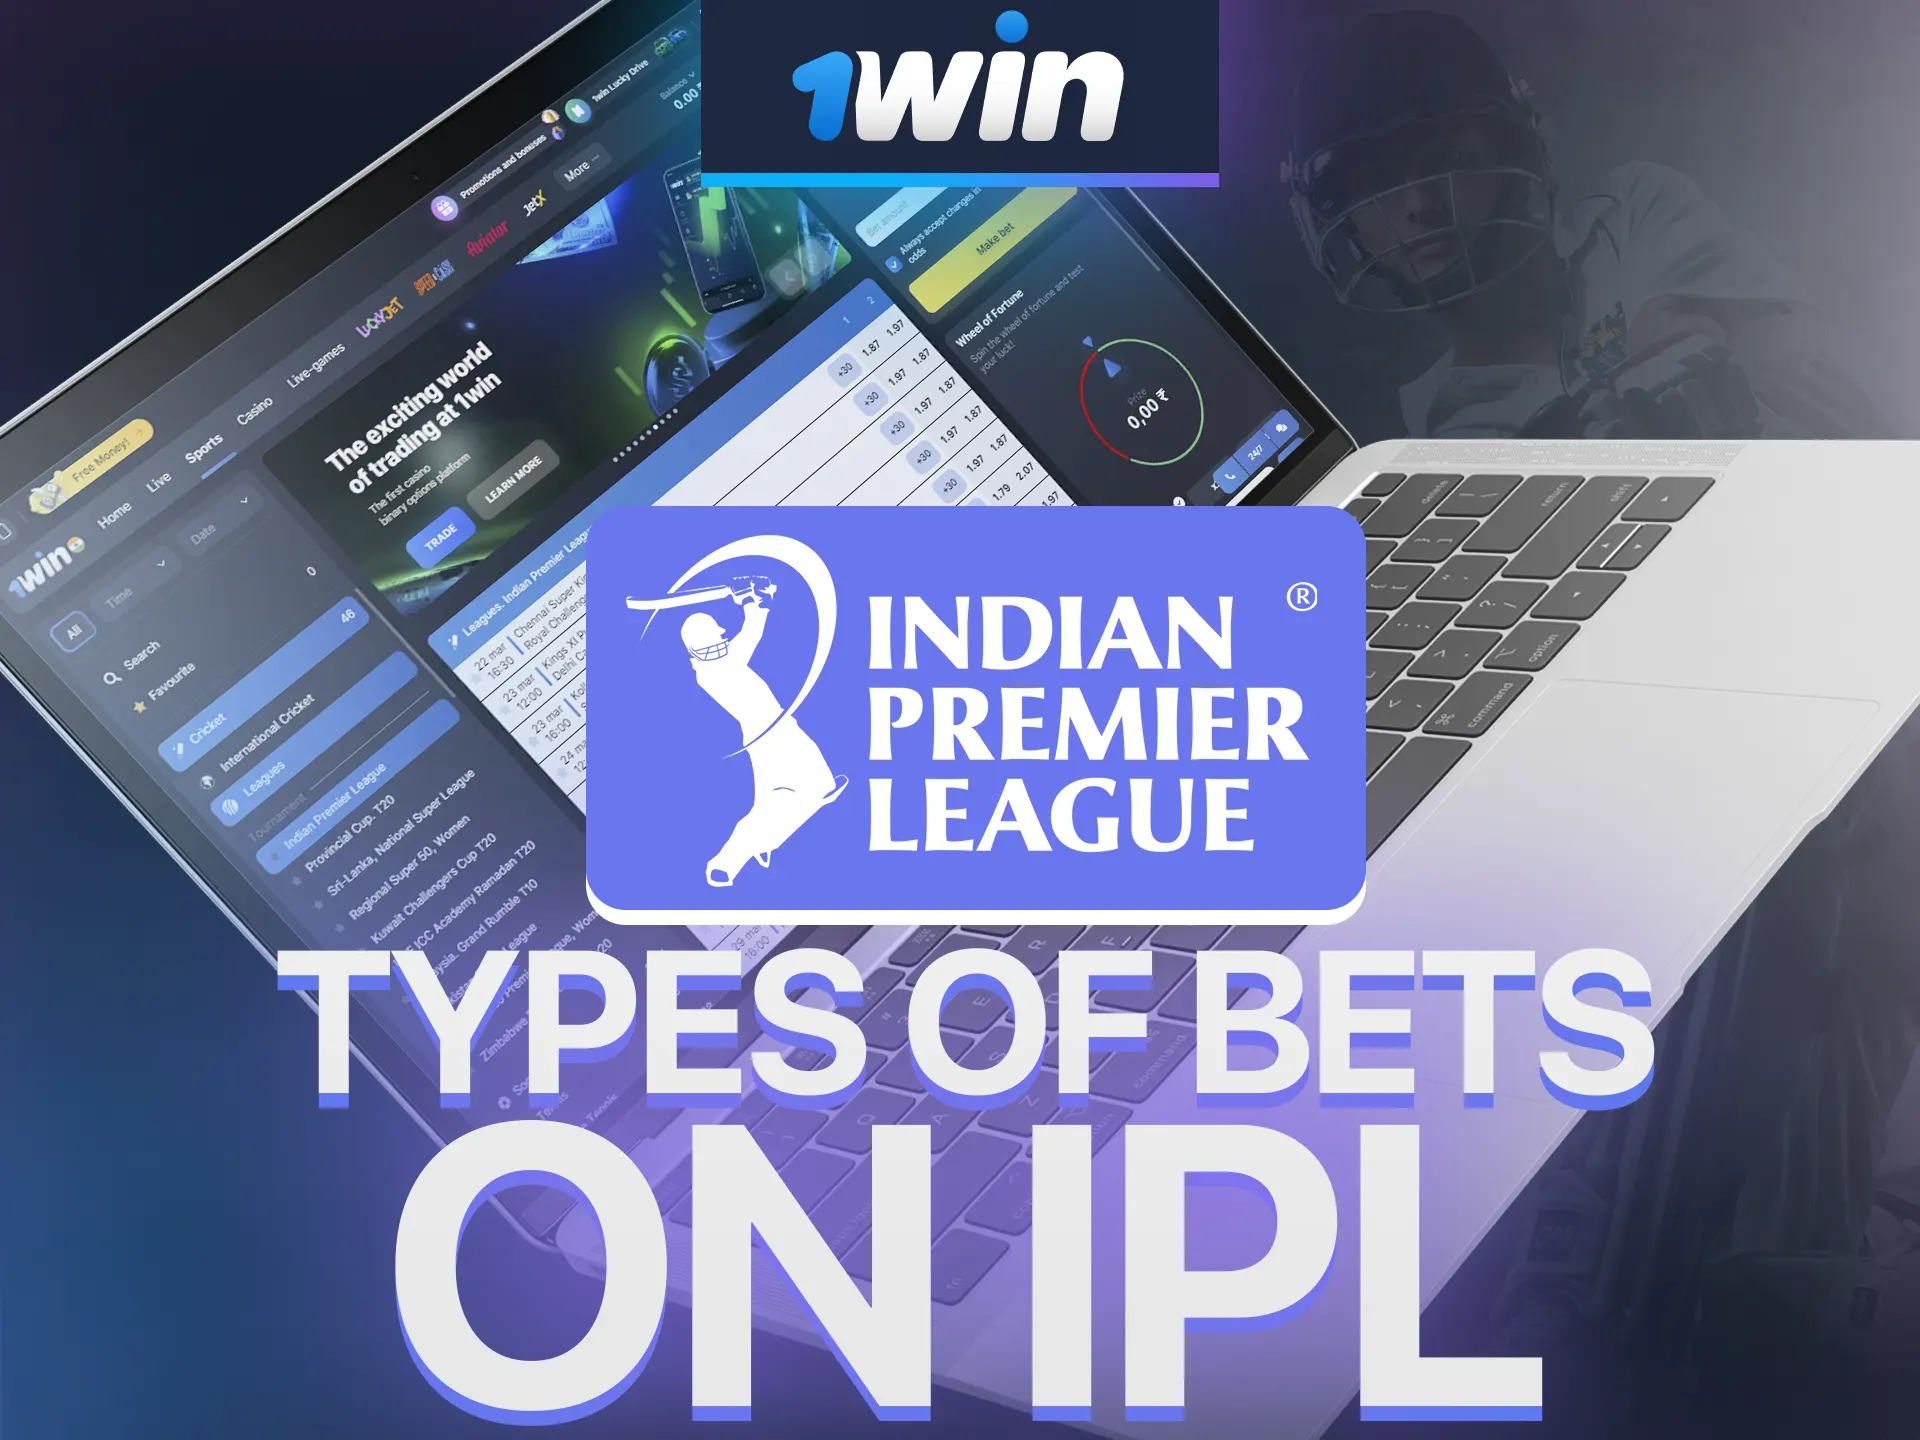 Explore IPL betting options on 1Win for exciting wins.